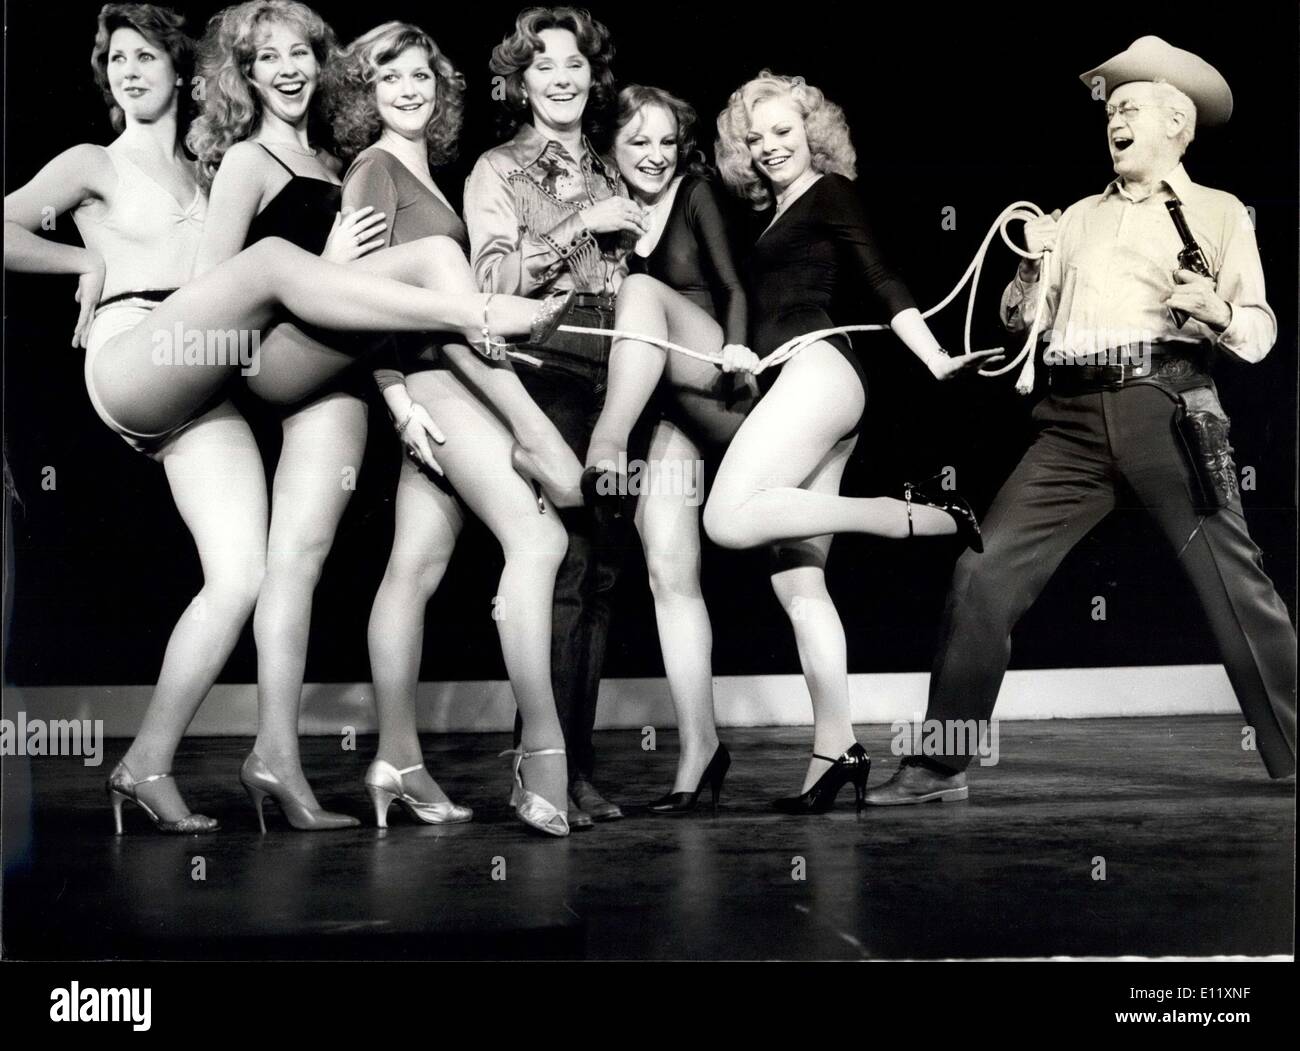 Feb. 05, 1981 - ''The Best Little Whorehouse in Texas'' to open in Drury Lane: The successful Broadway musical ''The Best Little Whorehouse in Texas'' is to open at the Theatre Royal, Drury Lane , on Thursday Feb 26th. Photo Shows Some of the girls from the chicken ranch get lassoed by the Sherigg Ed Earl Dodd (Henderson), They are from L - R: Lesley Guinn, the ''Madam'', Fiona Scoones, and Theresa Codling, during rehearsal at the Prince of Wales Theatre today. Stock Photo